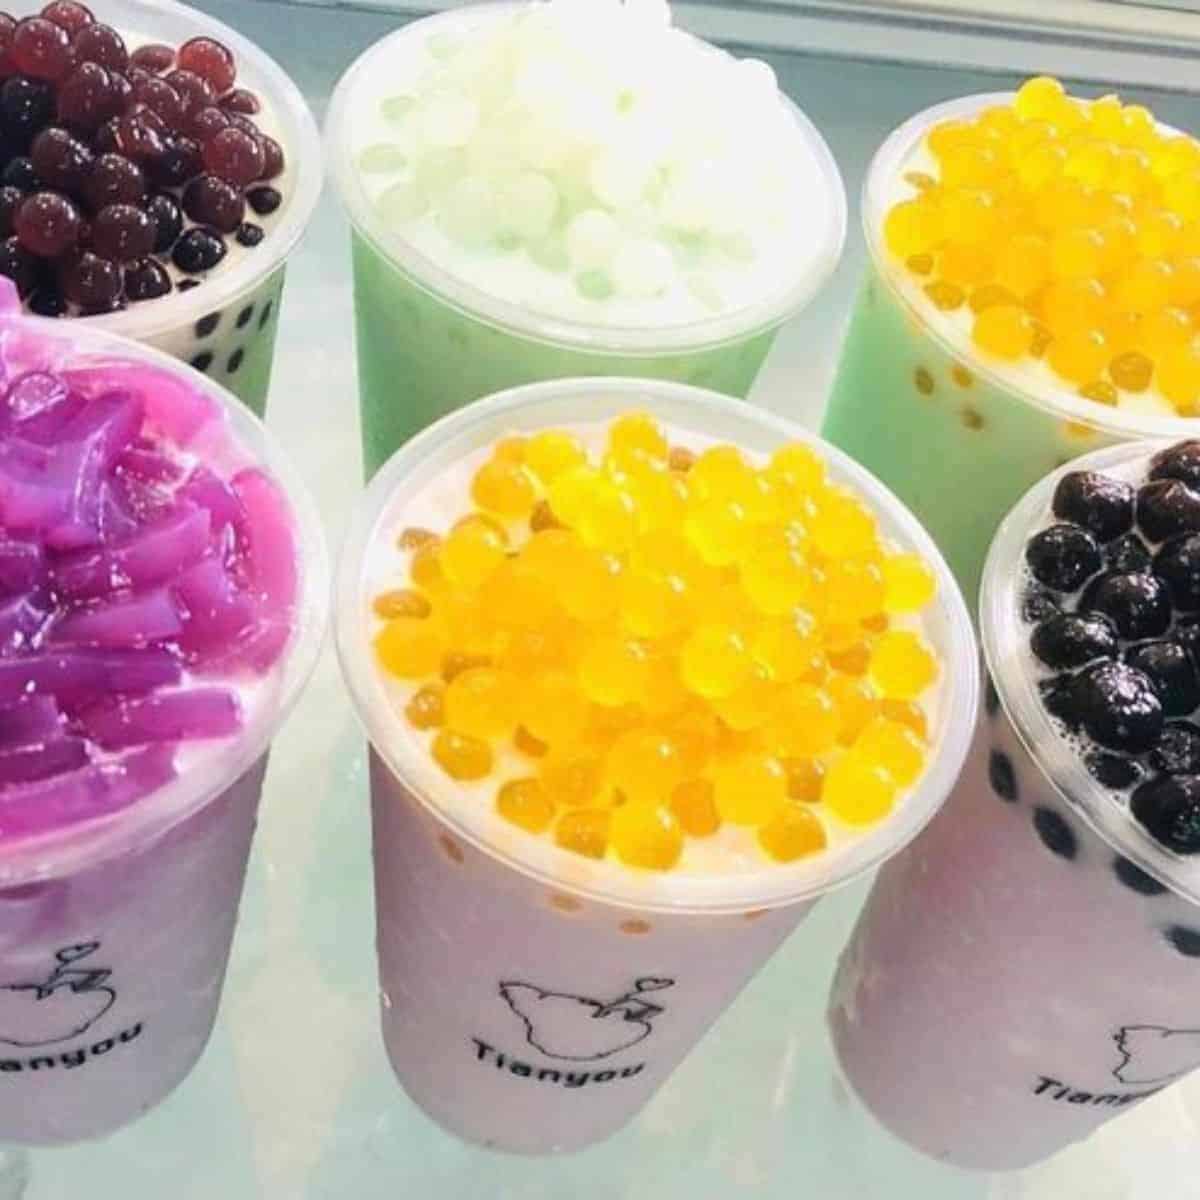 Six different colourful toppings which serve as choices to your Passion fruit boba beverage.